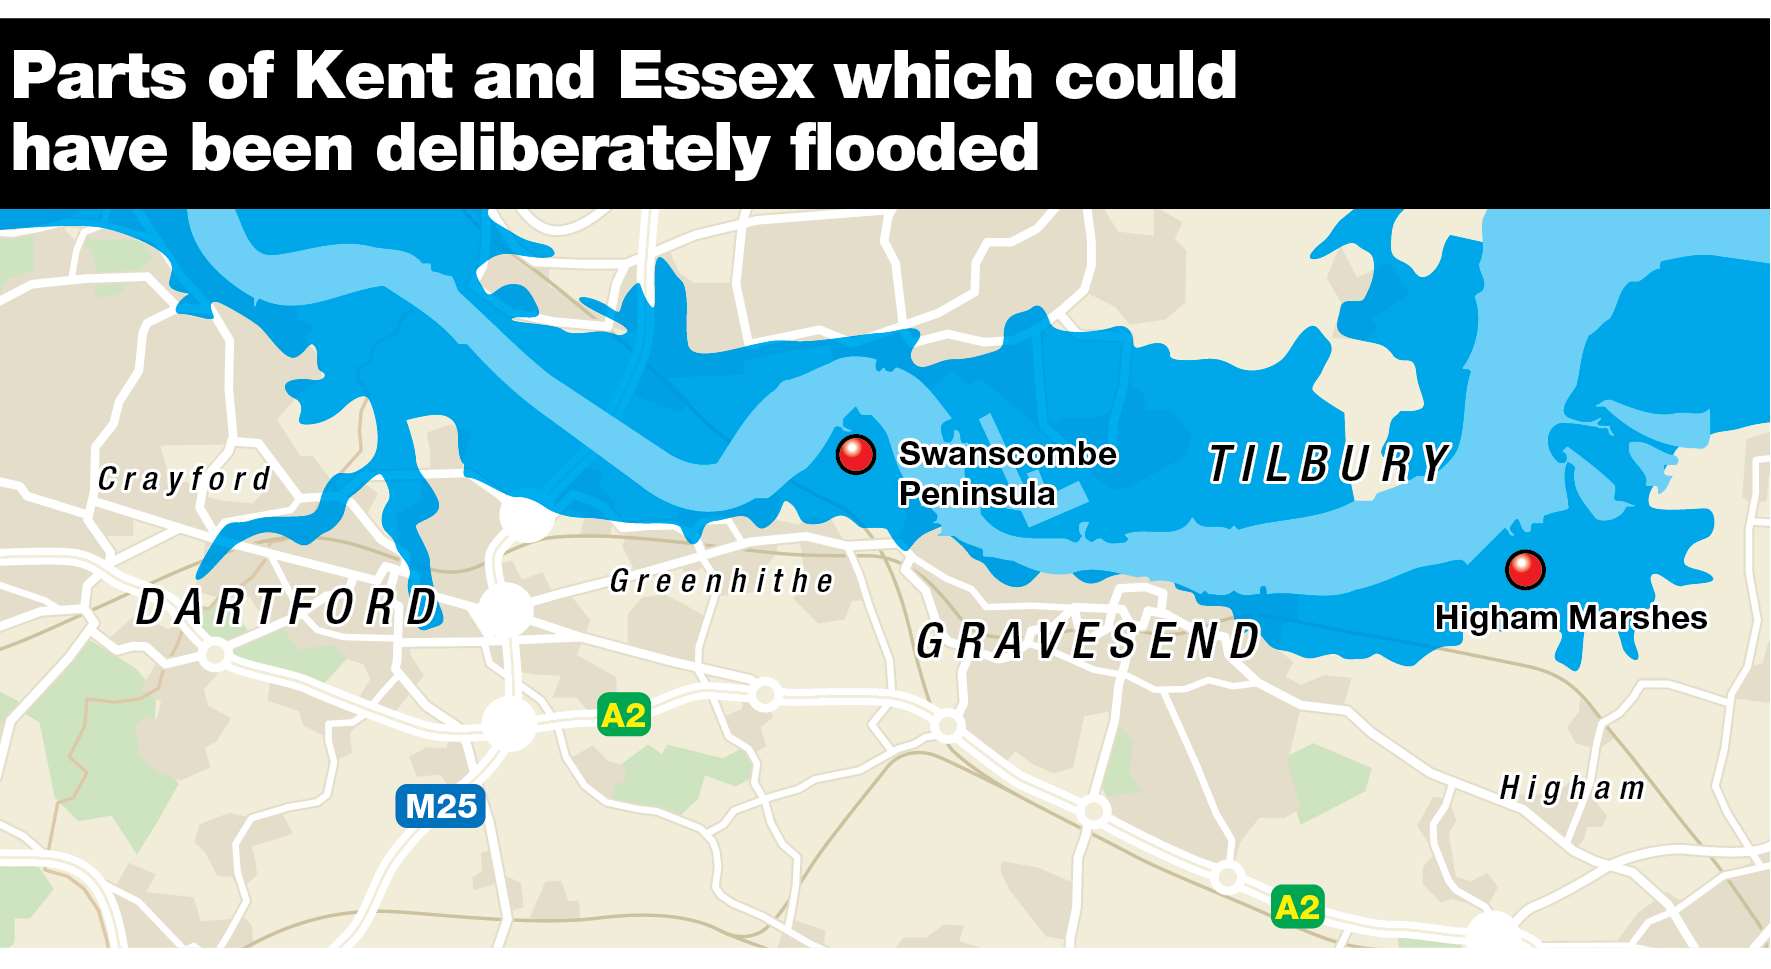 How a flooded Kent might look